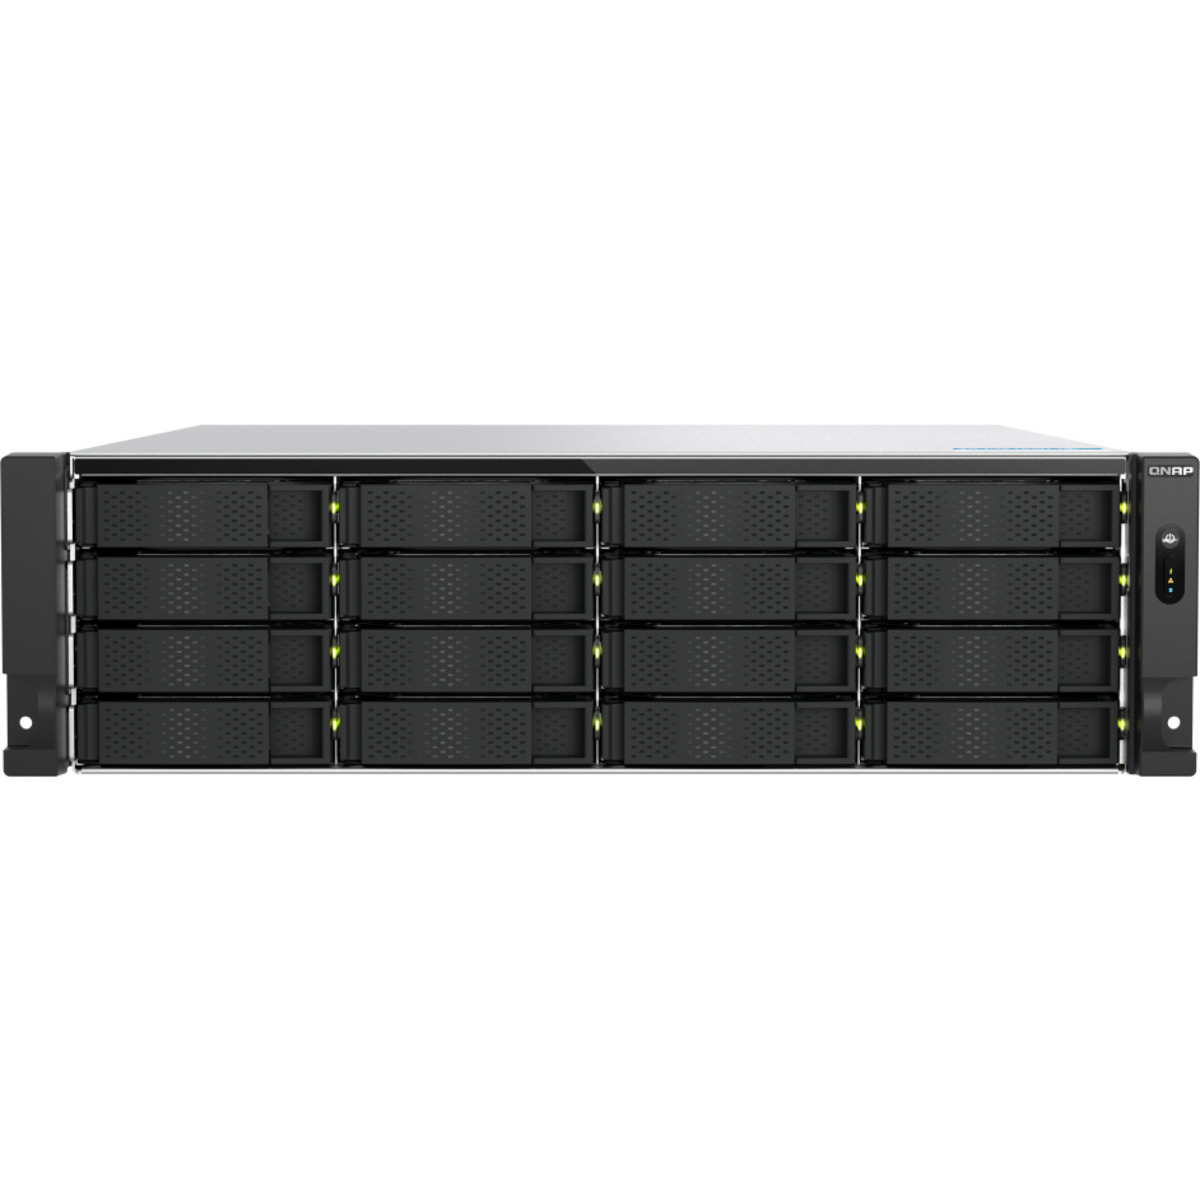 QNAP TS-h1677AXU-RP QUTS hero Ryzen 7 5.5tb 16-Bay RackMount Large Business / Enterprise NAS - Network Attached Storage Device 11x500gb Crucial MX500 CT500MX500SSD1 2.5 560/510MB/s SATA 6Gb/s SSD CONSUMER Class Drives Installed - Burn-In Tested TS-h1677AXU-RP QUTS hero Ryzen 7